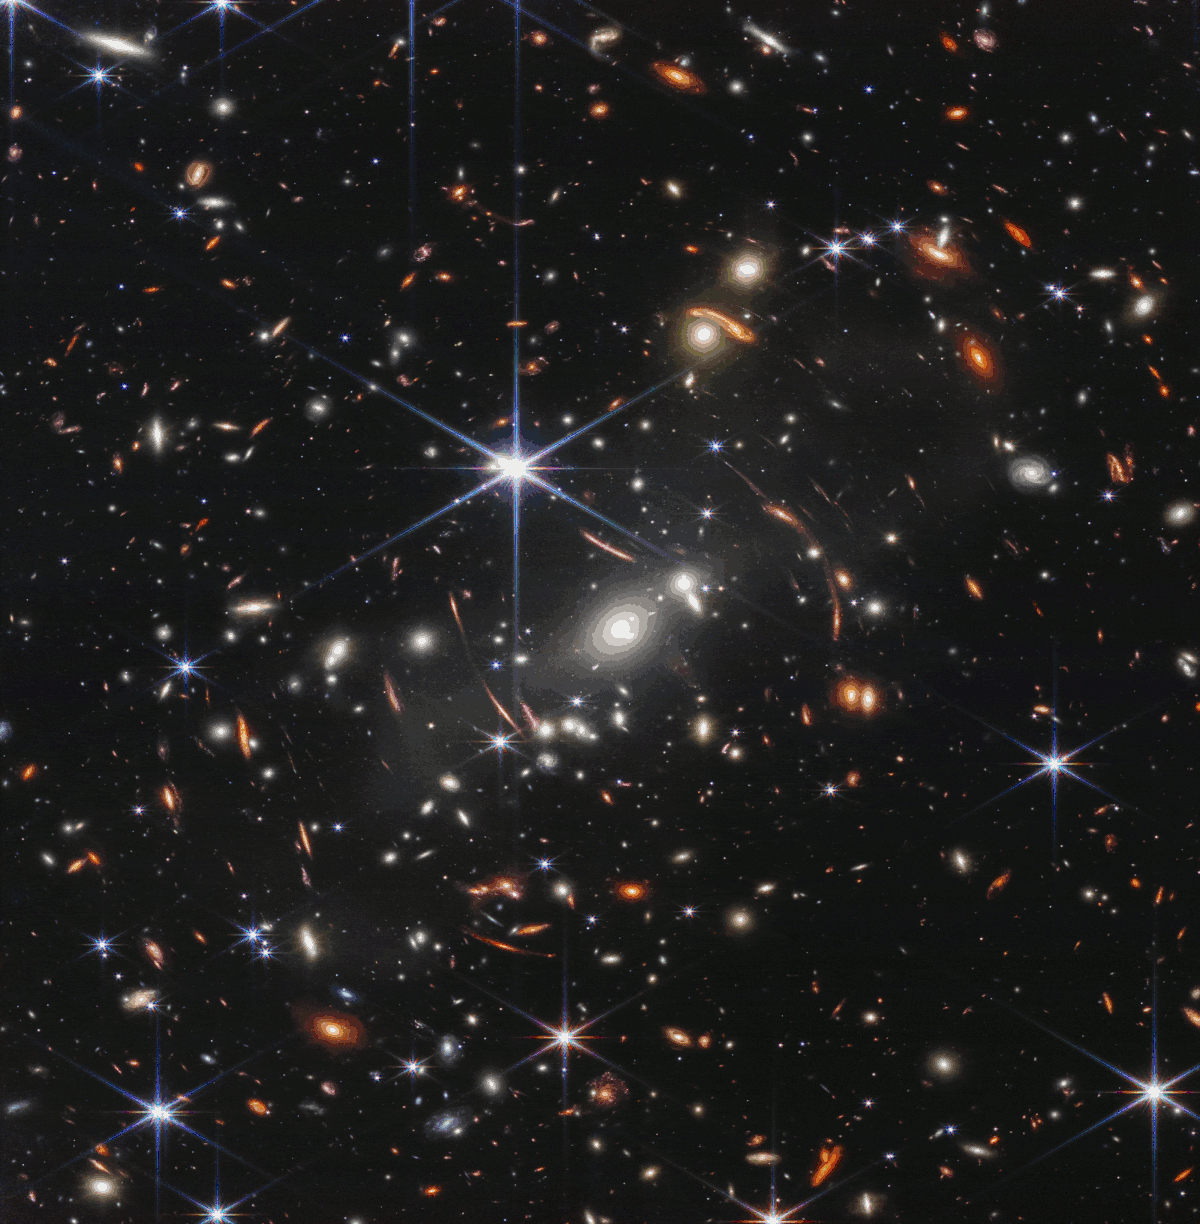 Comparison of images of SMACS 0723 taken by Hubble and more recently by James Webb (©NASA).